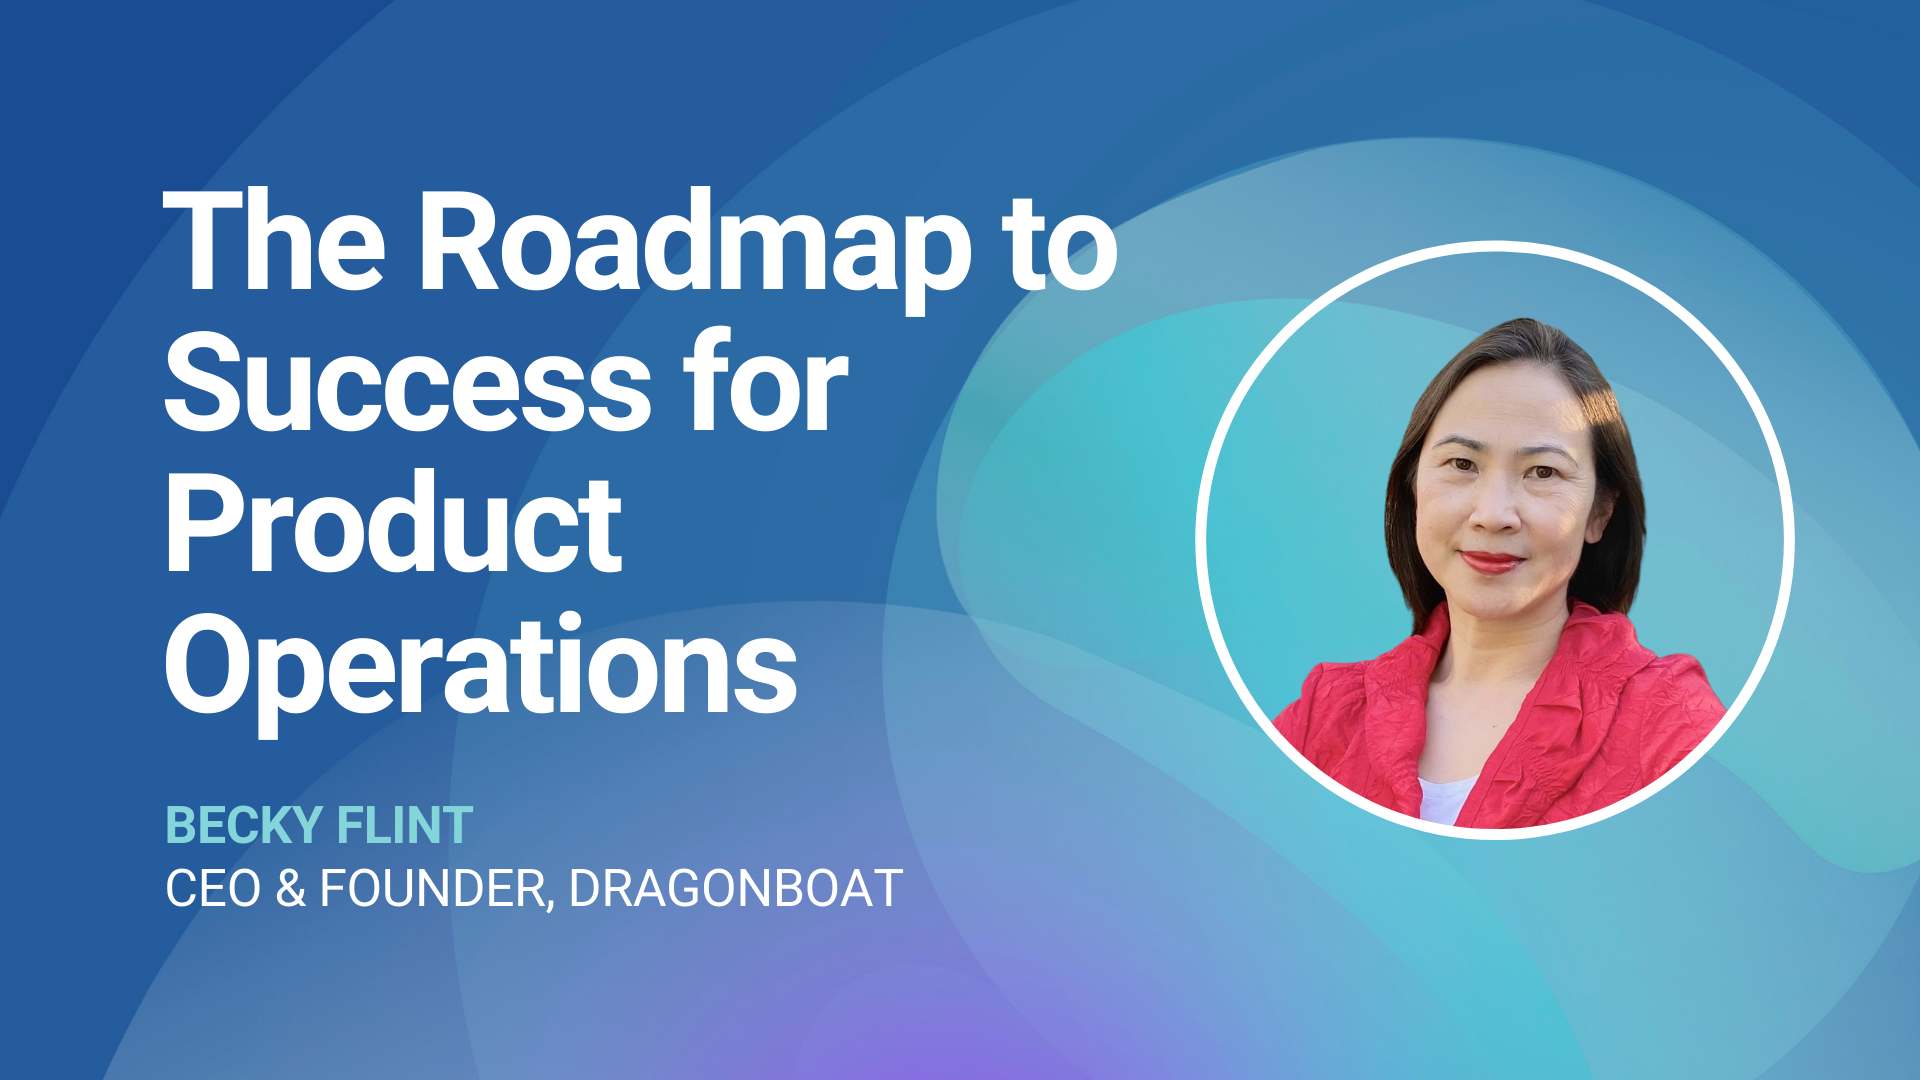 The Roadmap to Success for Product Operations